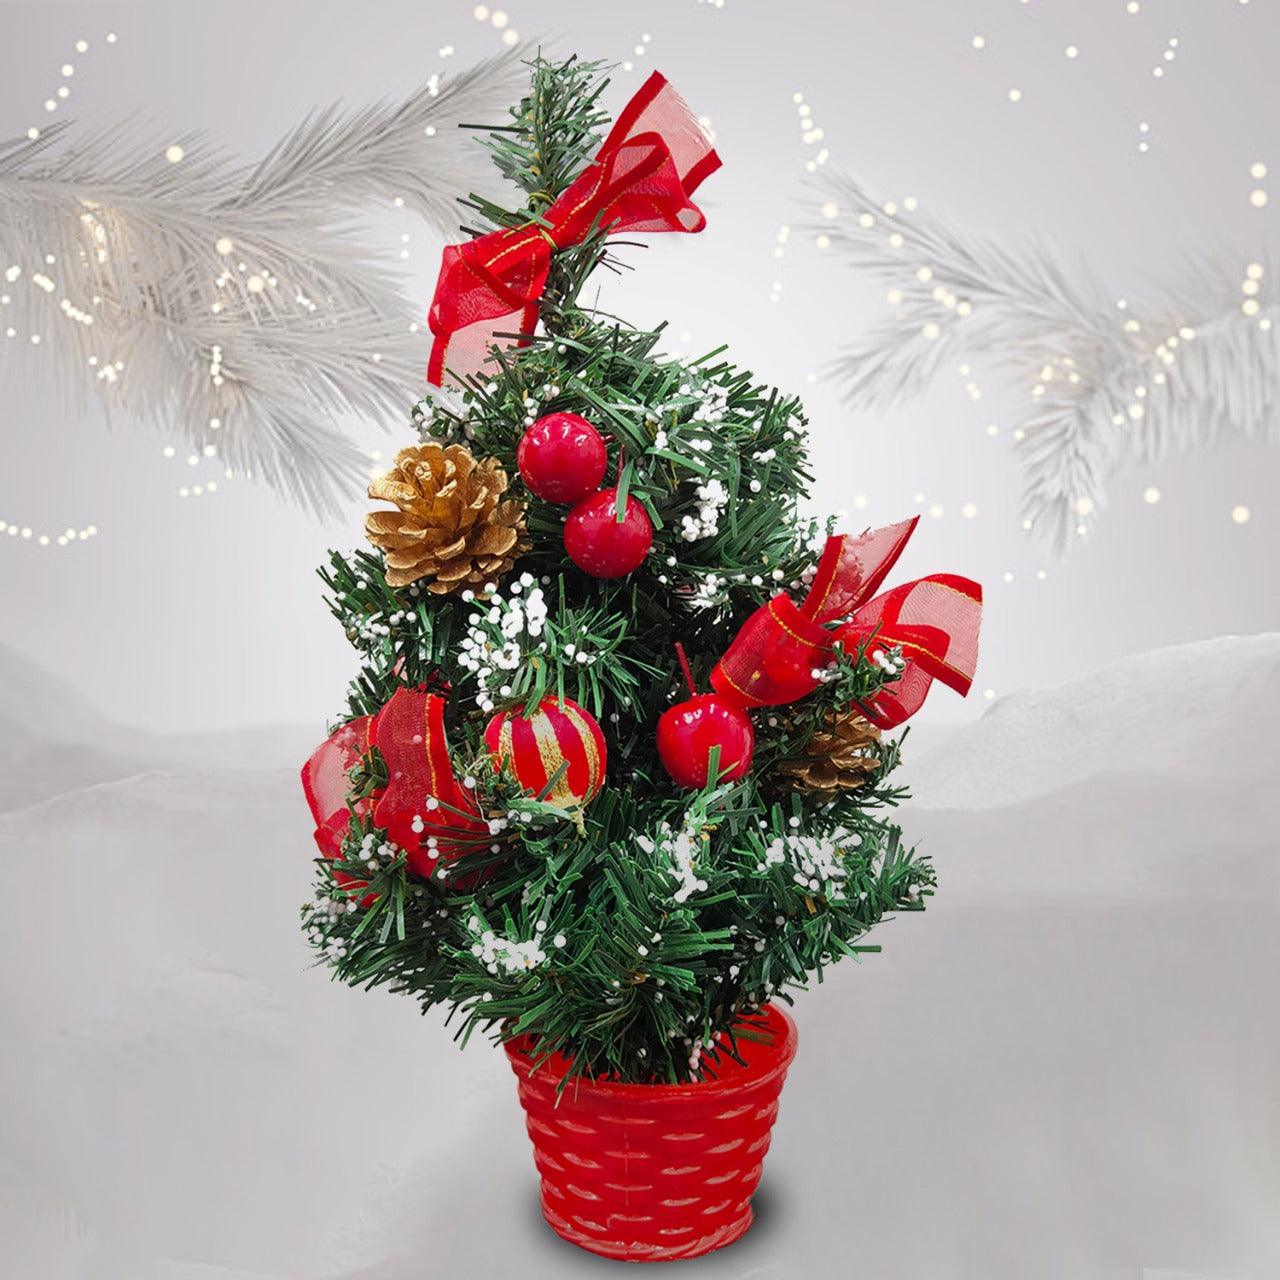 PartyCorp 1 ft Artificial Tabletop Mini Christmas Tree Decor for Office, Room Decor - FunCorp India